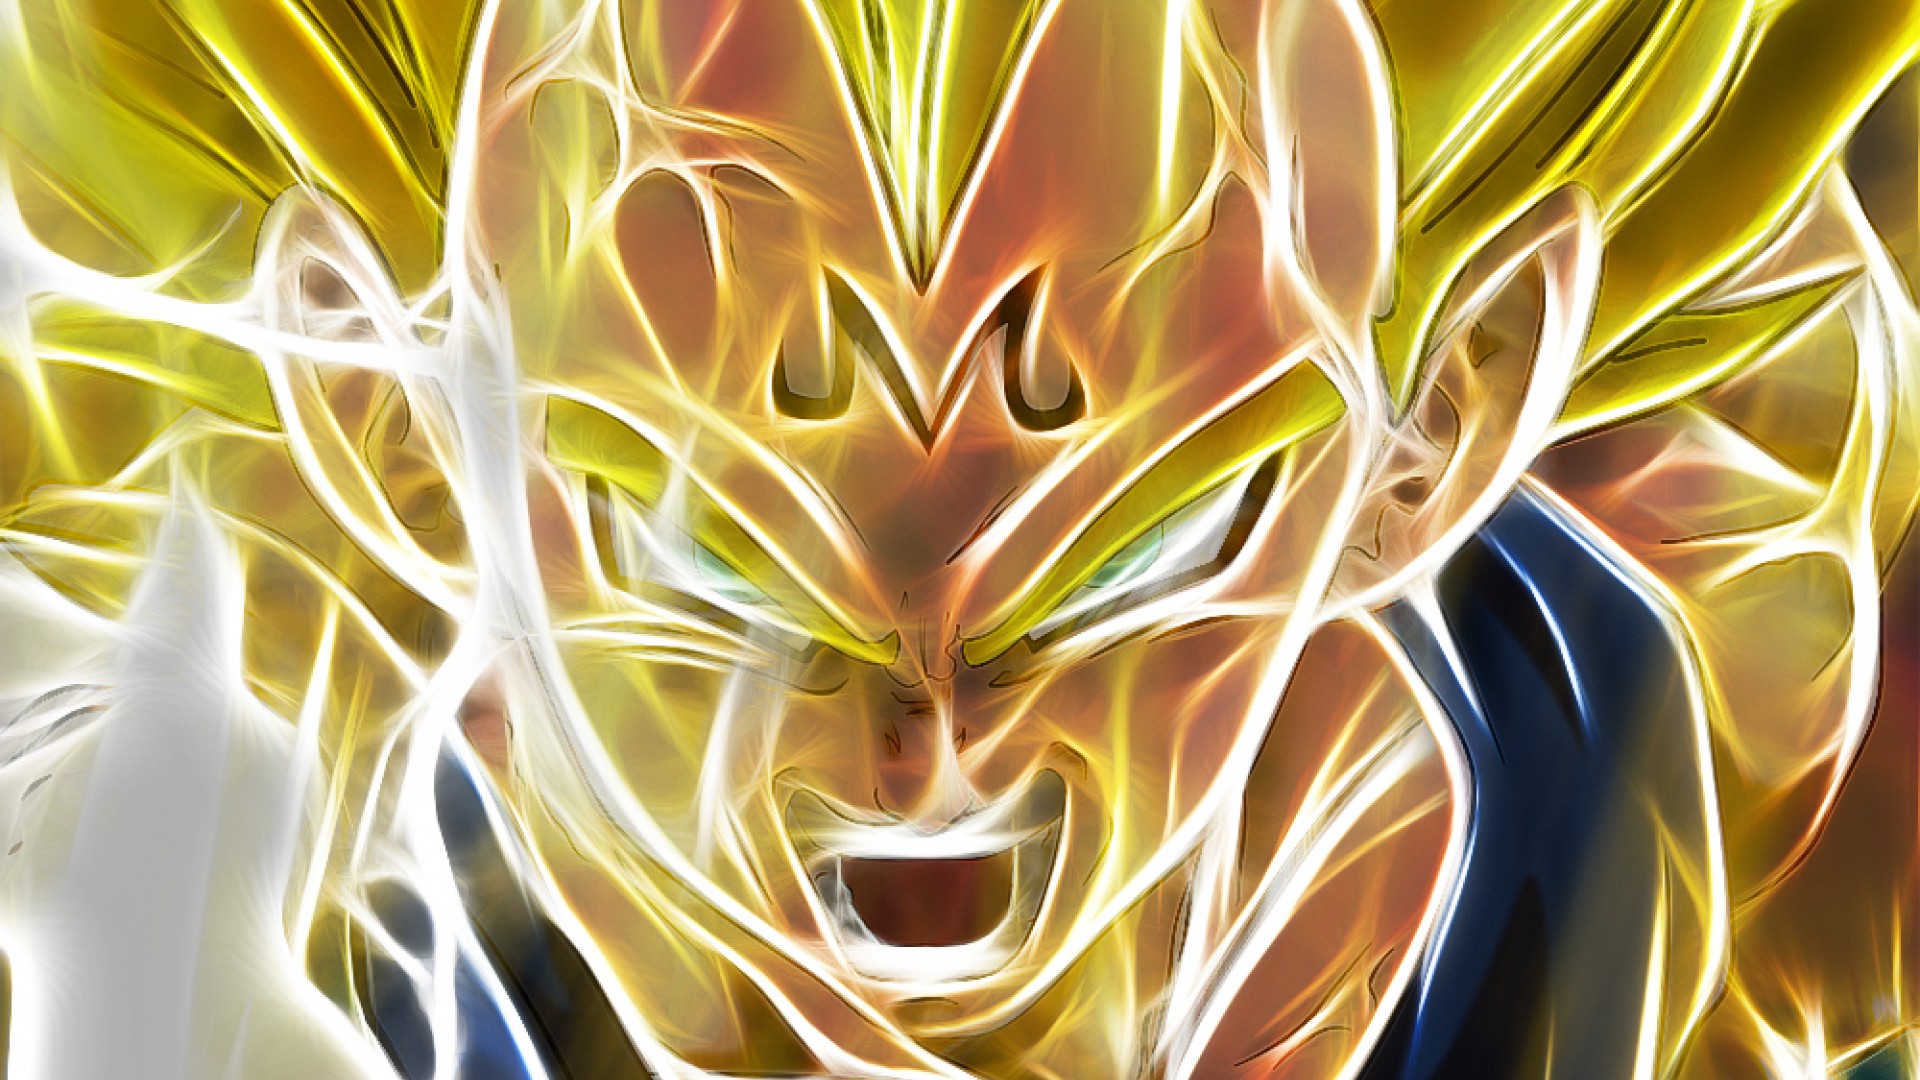 Vegeta Wallpapers High Quality | Download Free